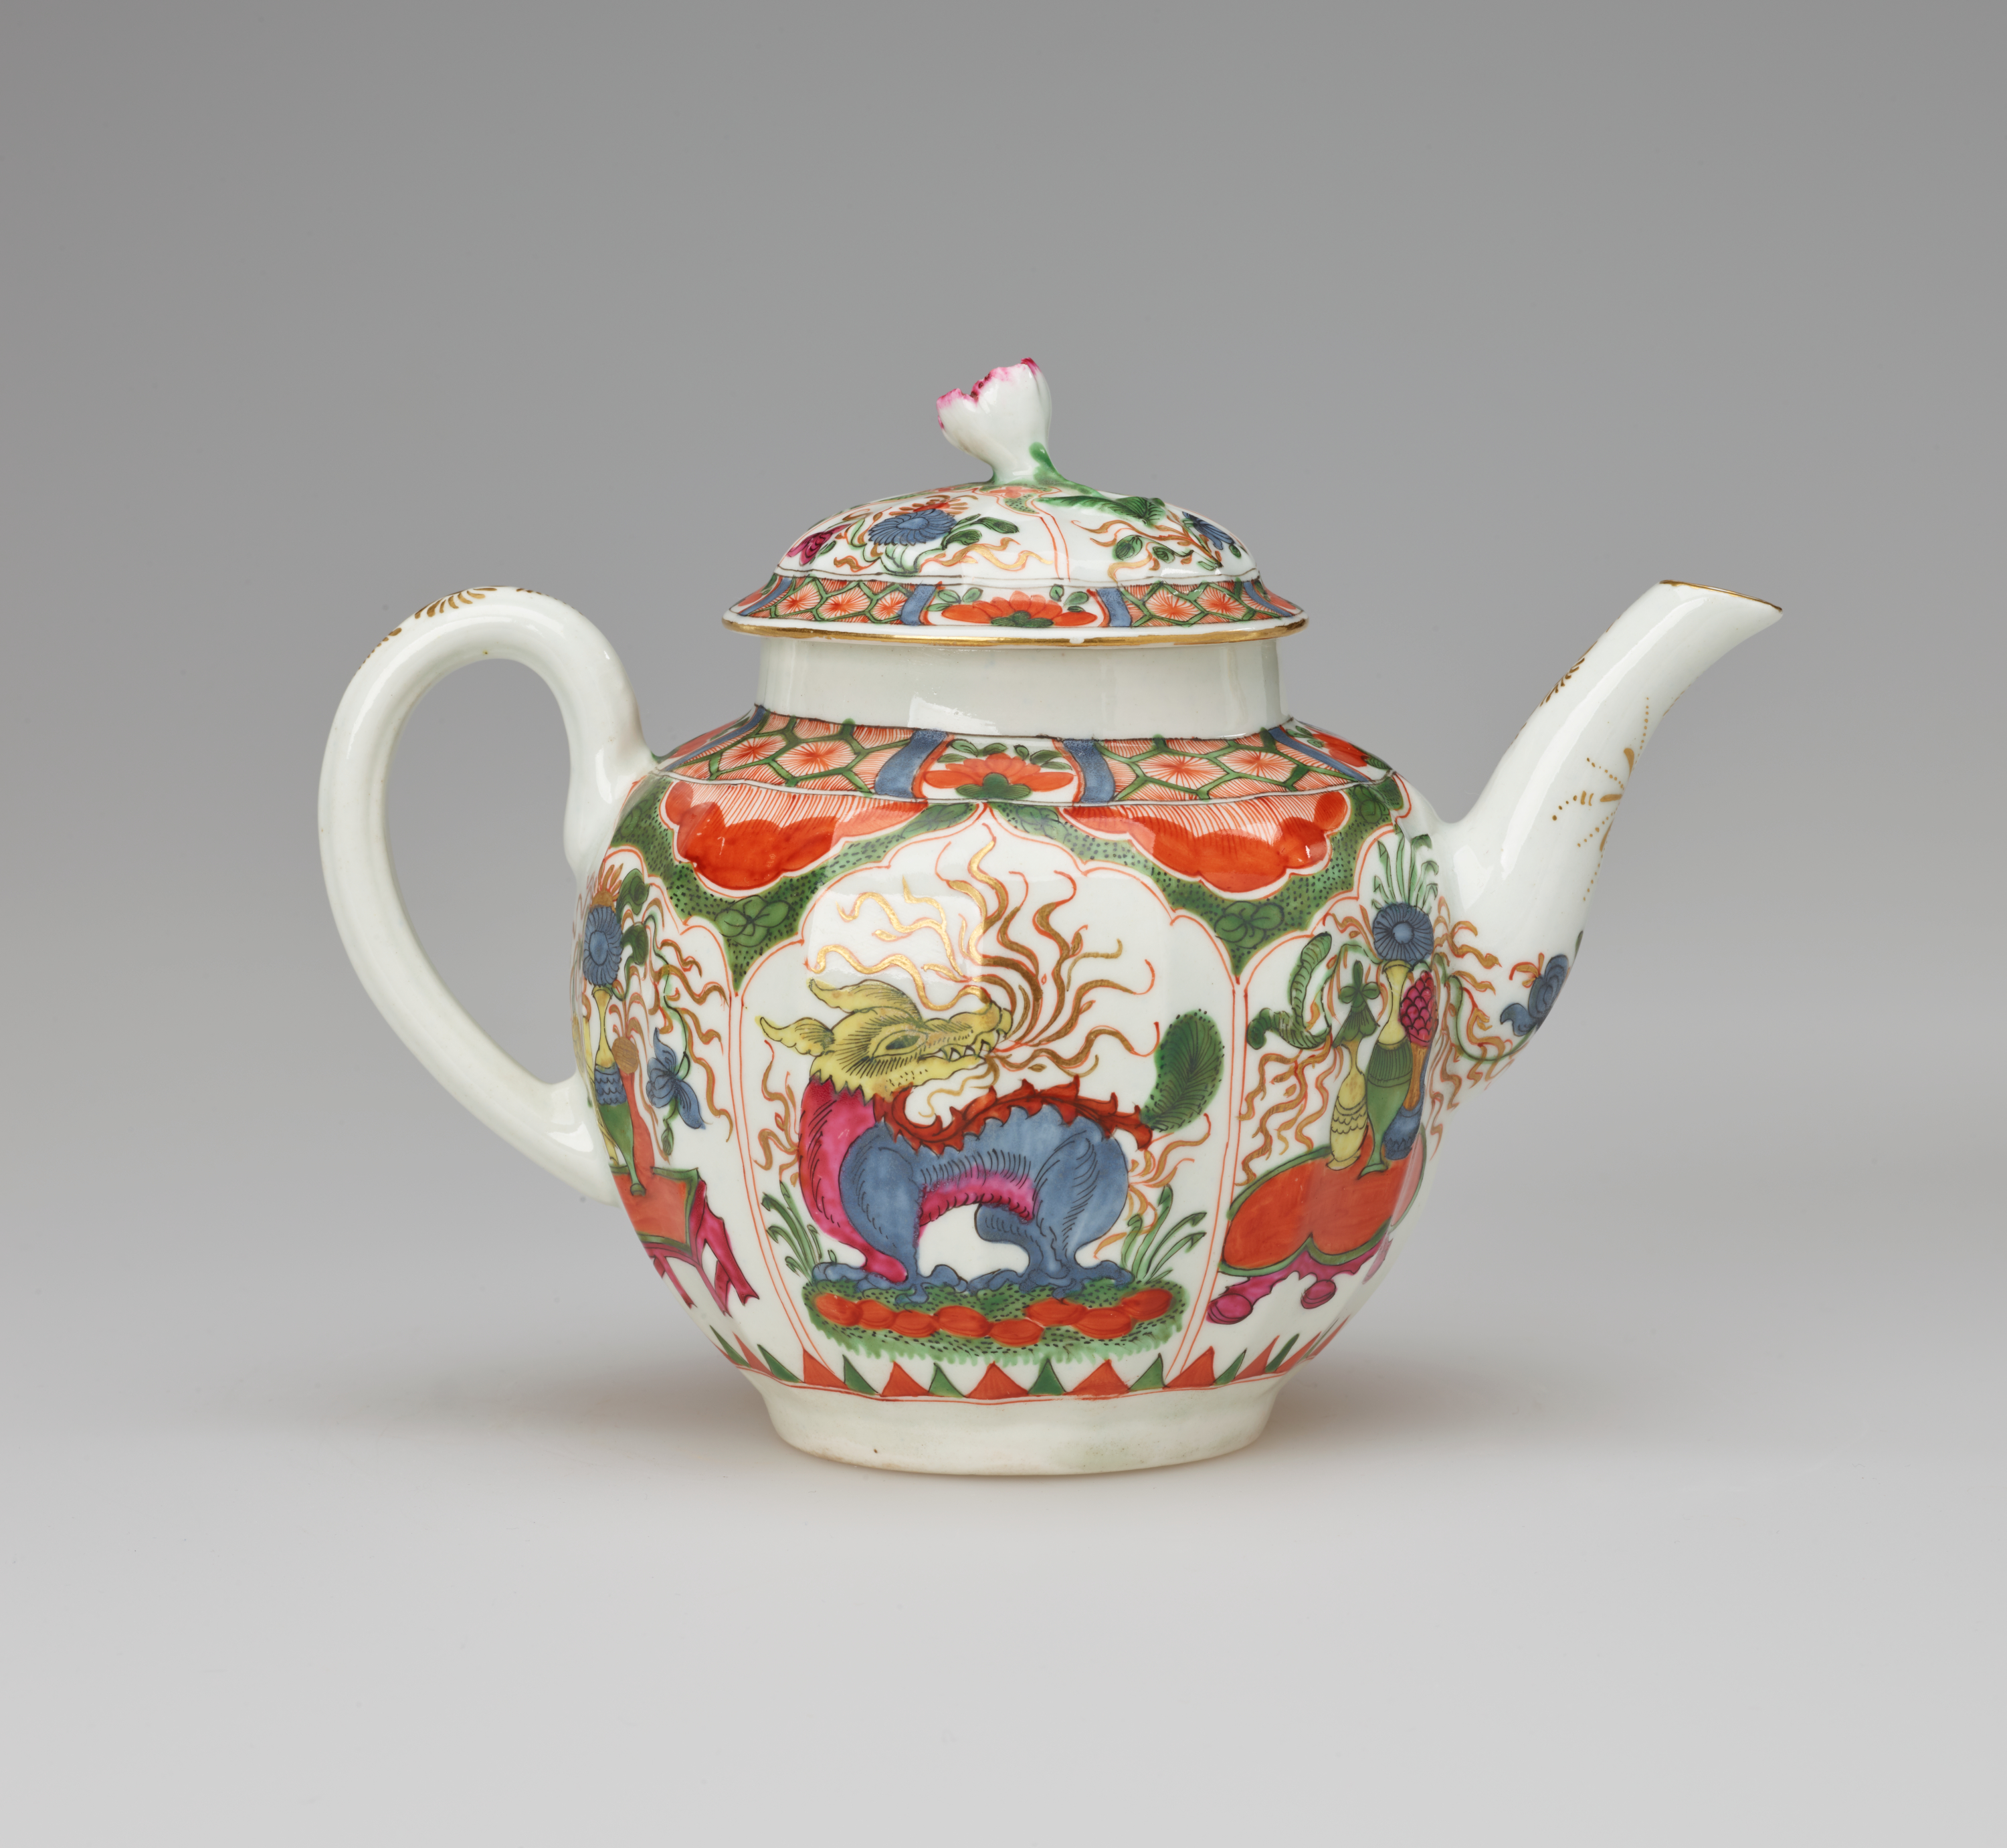 /A%20white%20teapot%20with%20a%20handle%2C%20spout%2C%20lid%20and%20finial%2C%20with%20green%2C%20red%2C%20blue%2C%20pink%2C%20yellow%20and%20gilded%20decorations.%20The%20main%20vignite%20shows%20a%20dragon%20on%20a%20table.